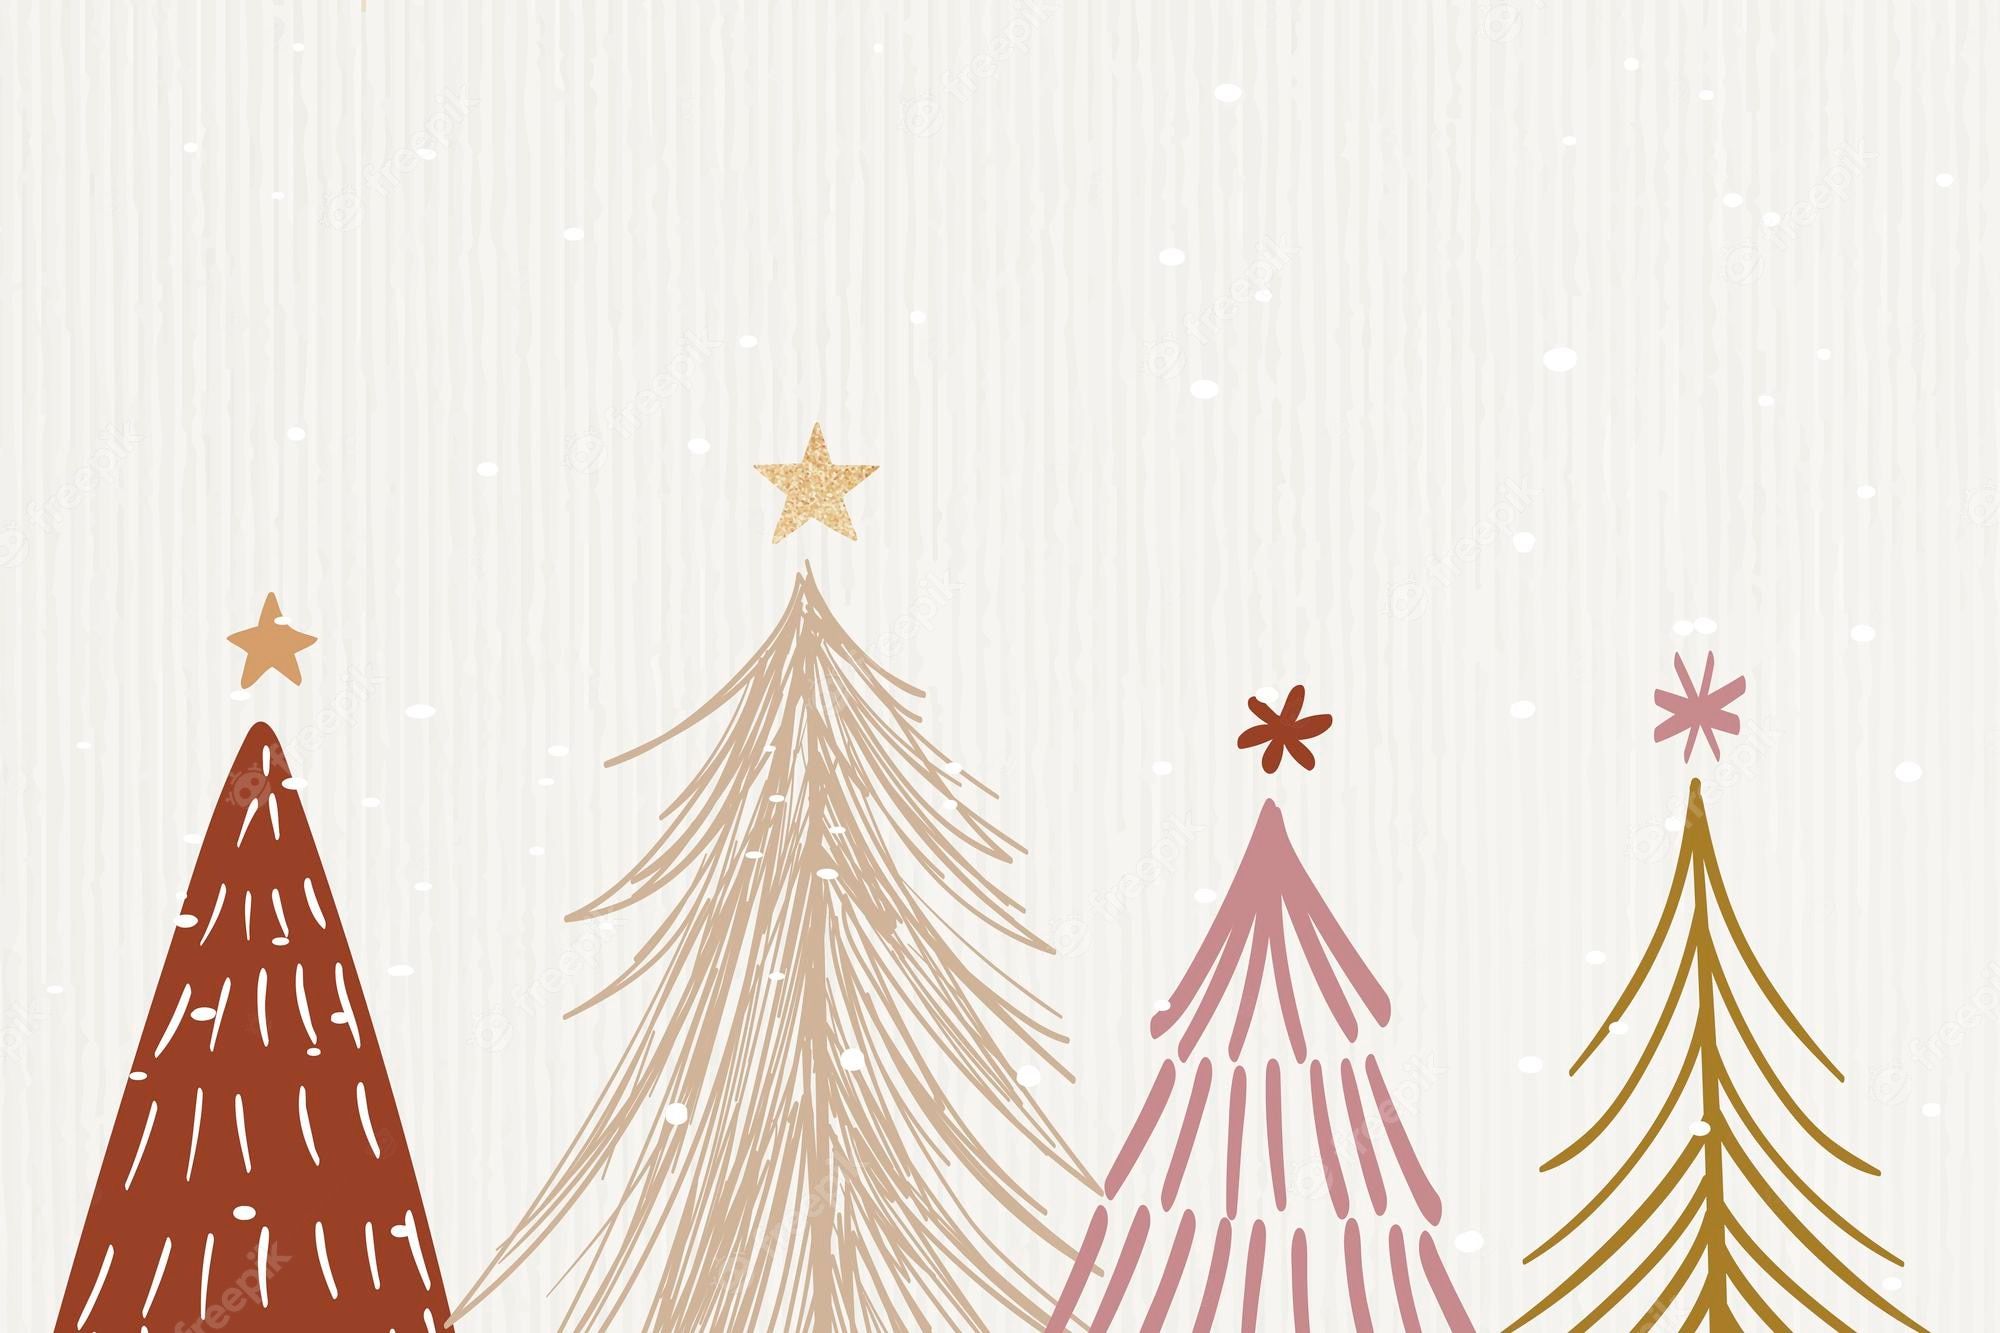 A free Christmas desktop wallpaper with four stylized Christmas trees. - White Christmas